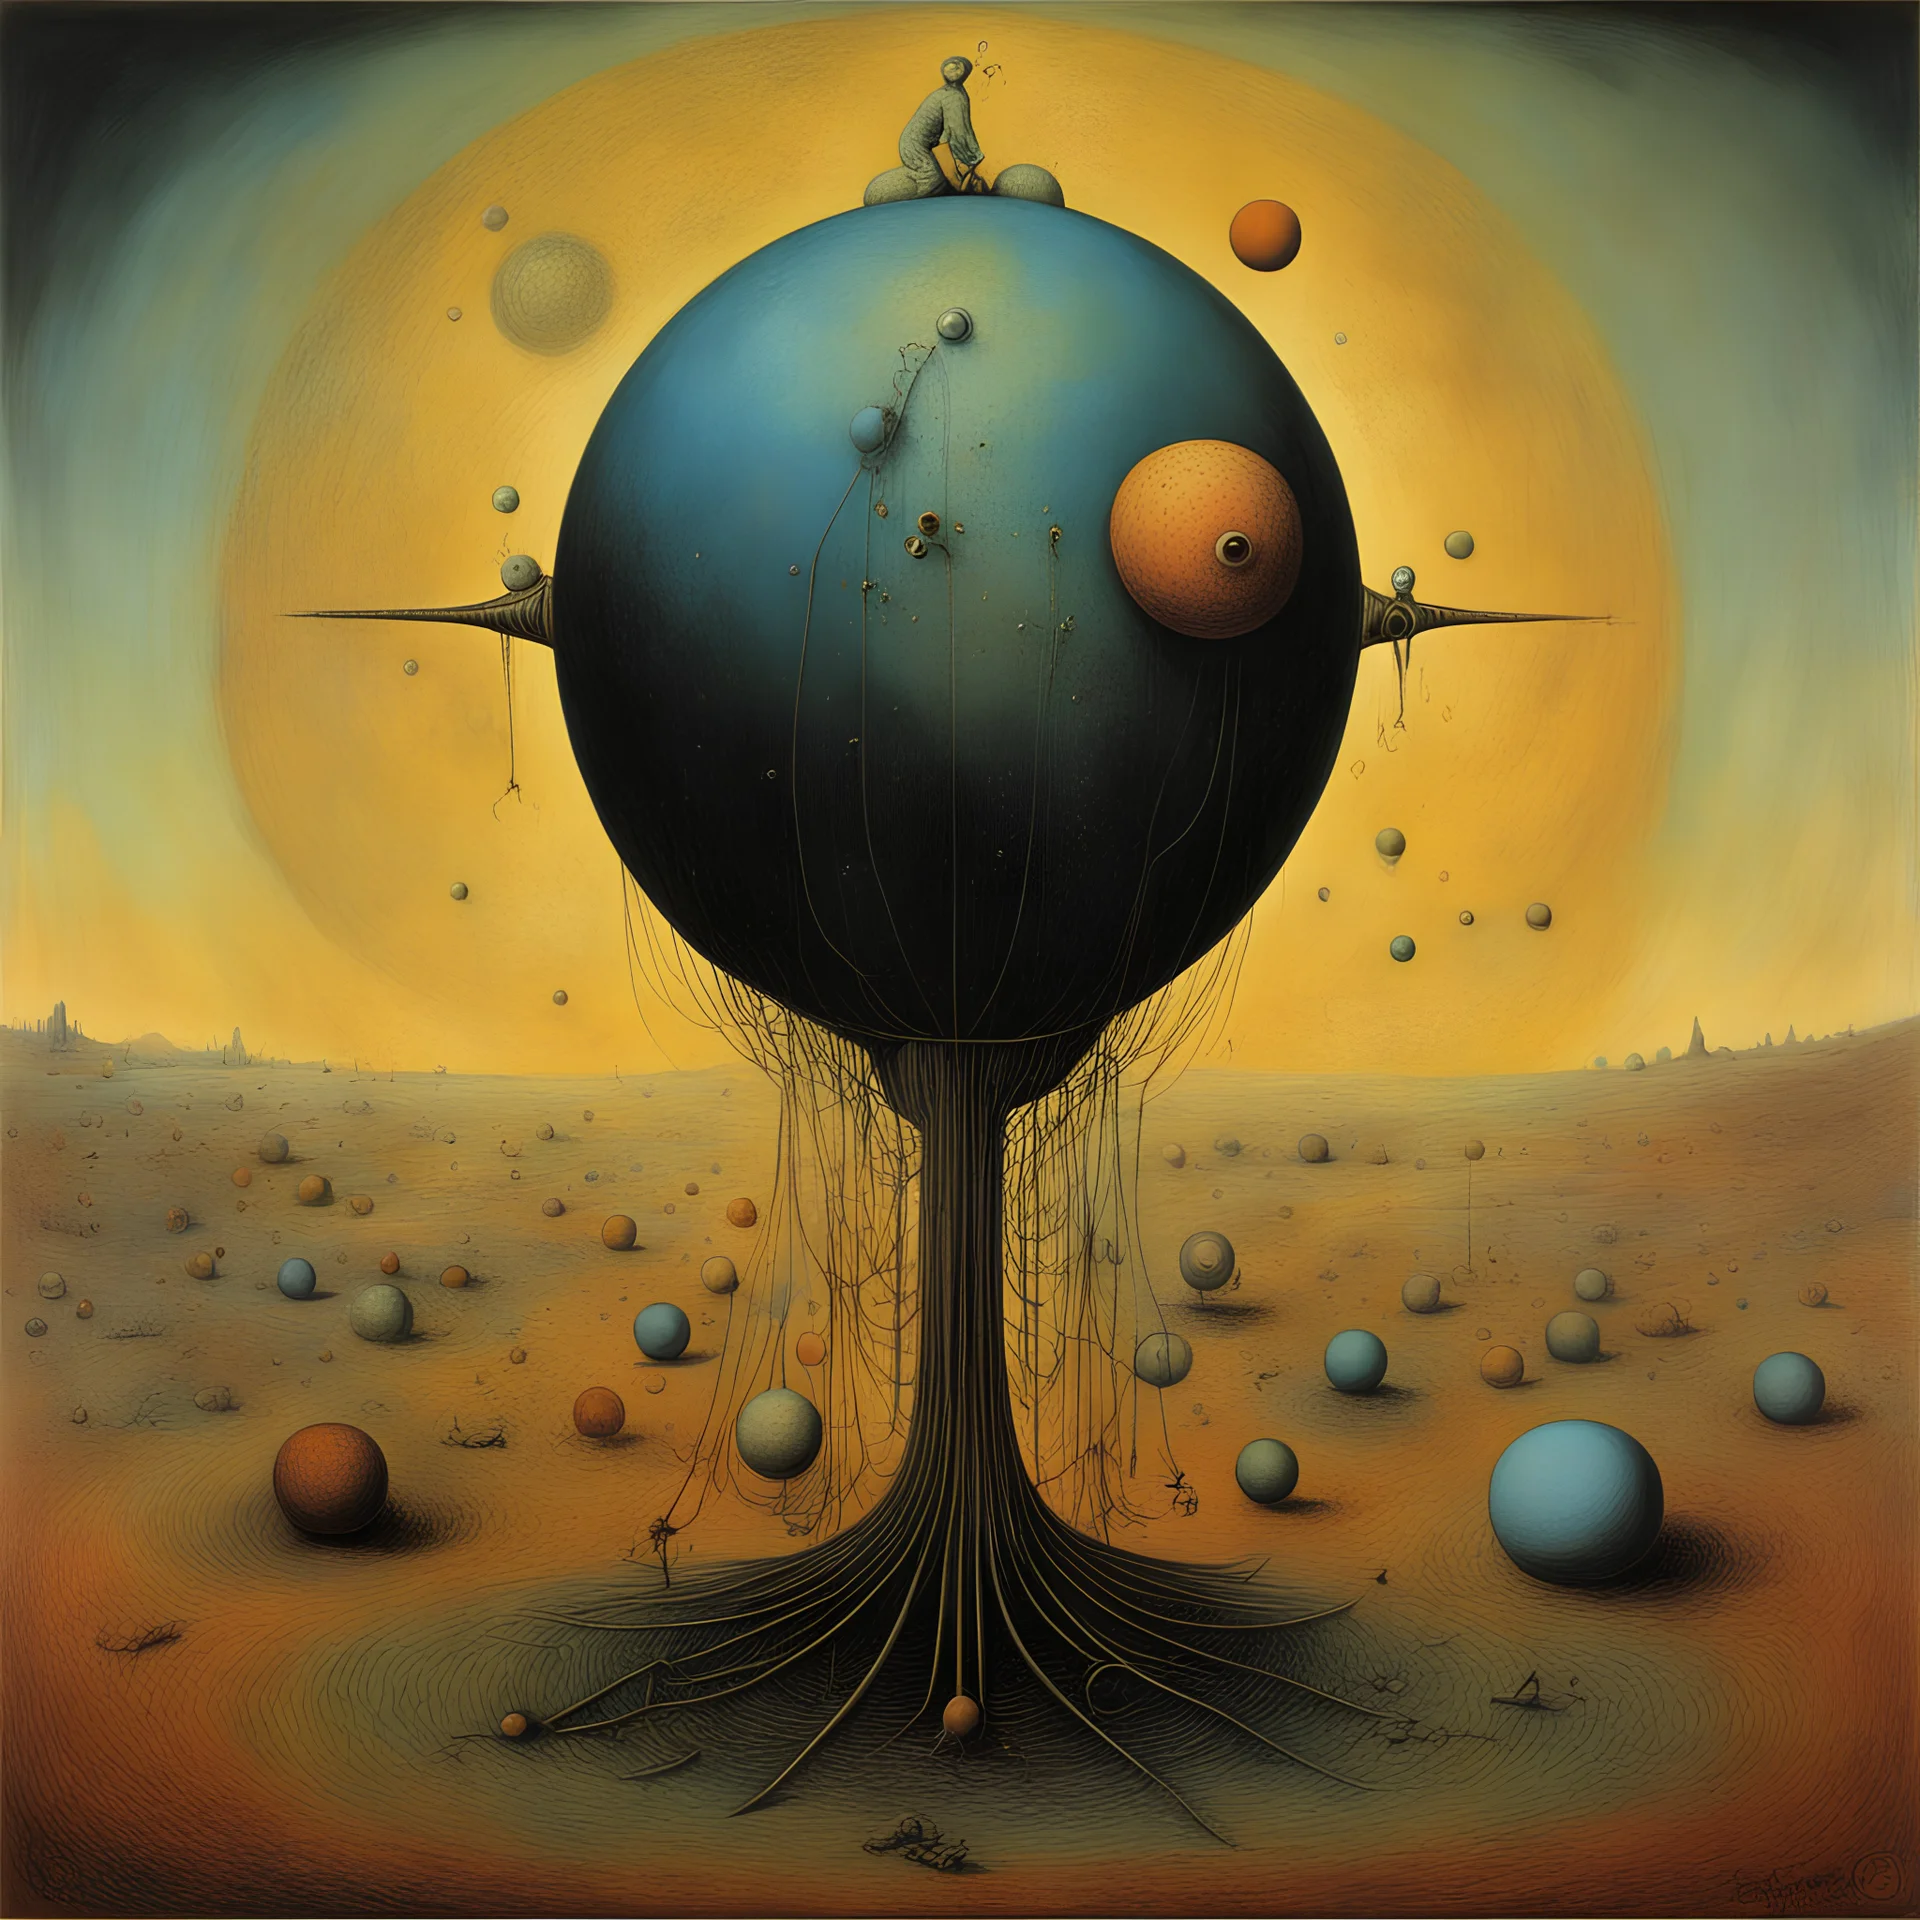 Vivisection of the spheres, human organ grinder, Bridget Bate Tichenor and Joan Miro and Zdzislaw Beksinski deliver a surreal masterpiece, muted colors, sinister, creepy, sharp focus, dark shines, asymmetric, randomly upside-down elements